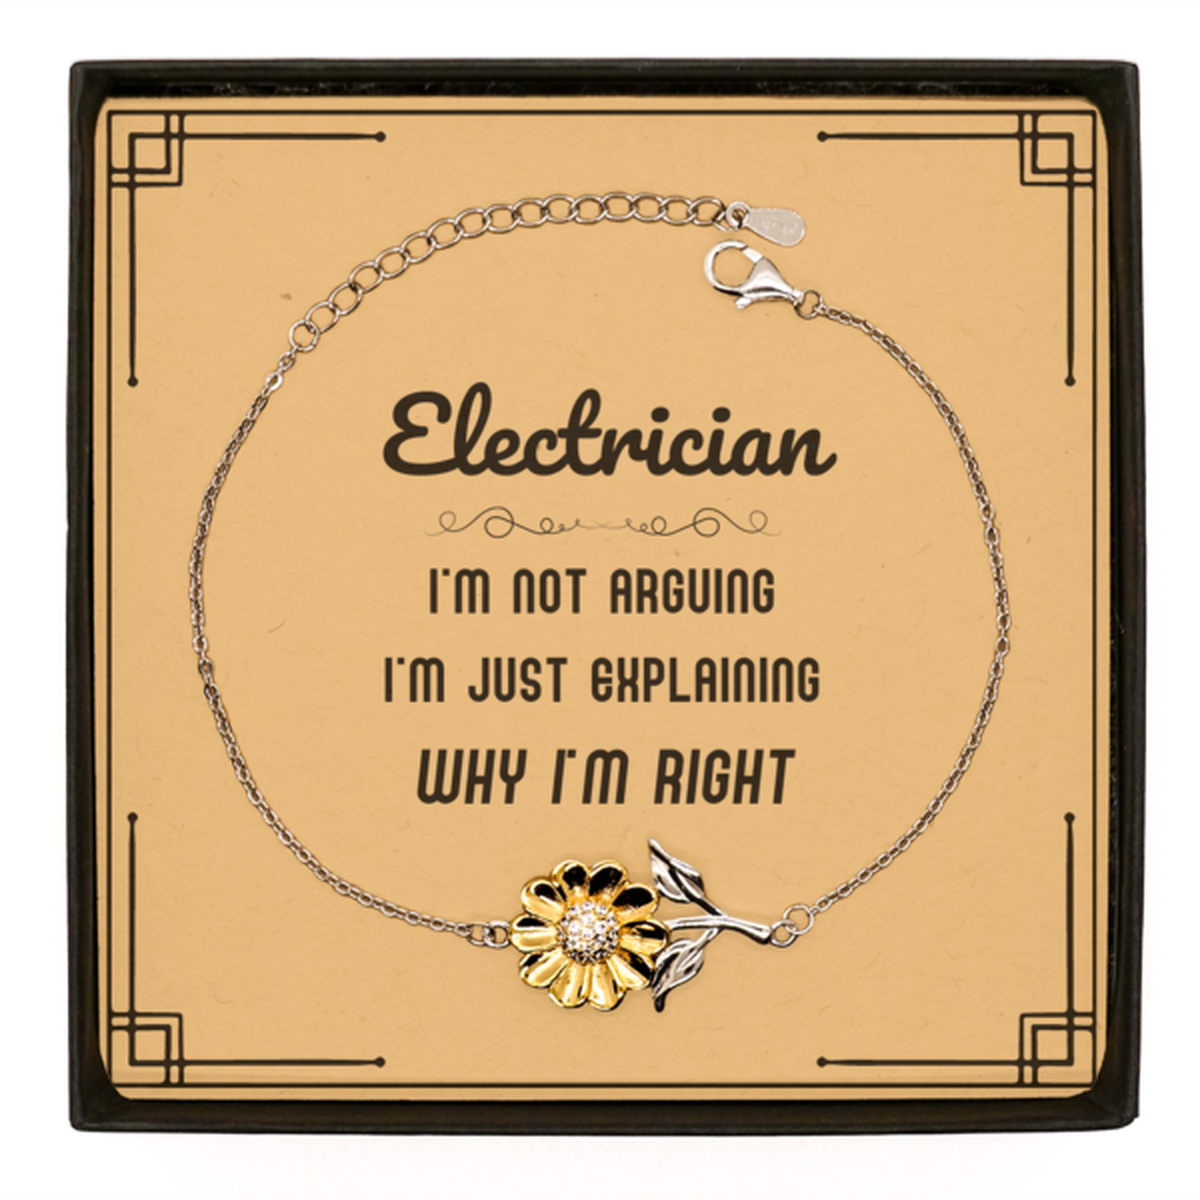 Electrician I'm not Arguing. I'm Just Explaining Why I'm RIGHT Sunflower Bracelet, Funny Saying Quote Electrician Gifts For Electrician Message Card Graduation Birthday Christmas Gifts for Men Women Coworker